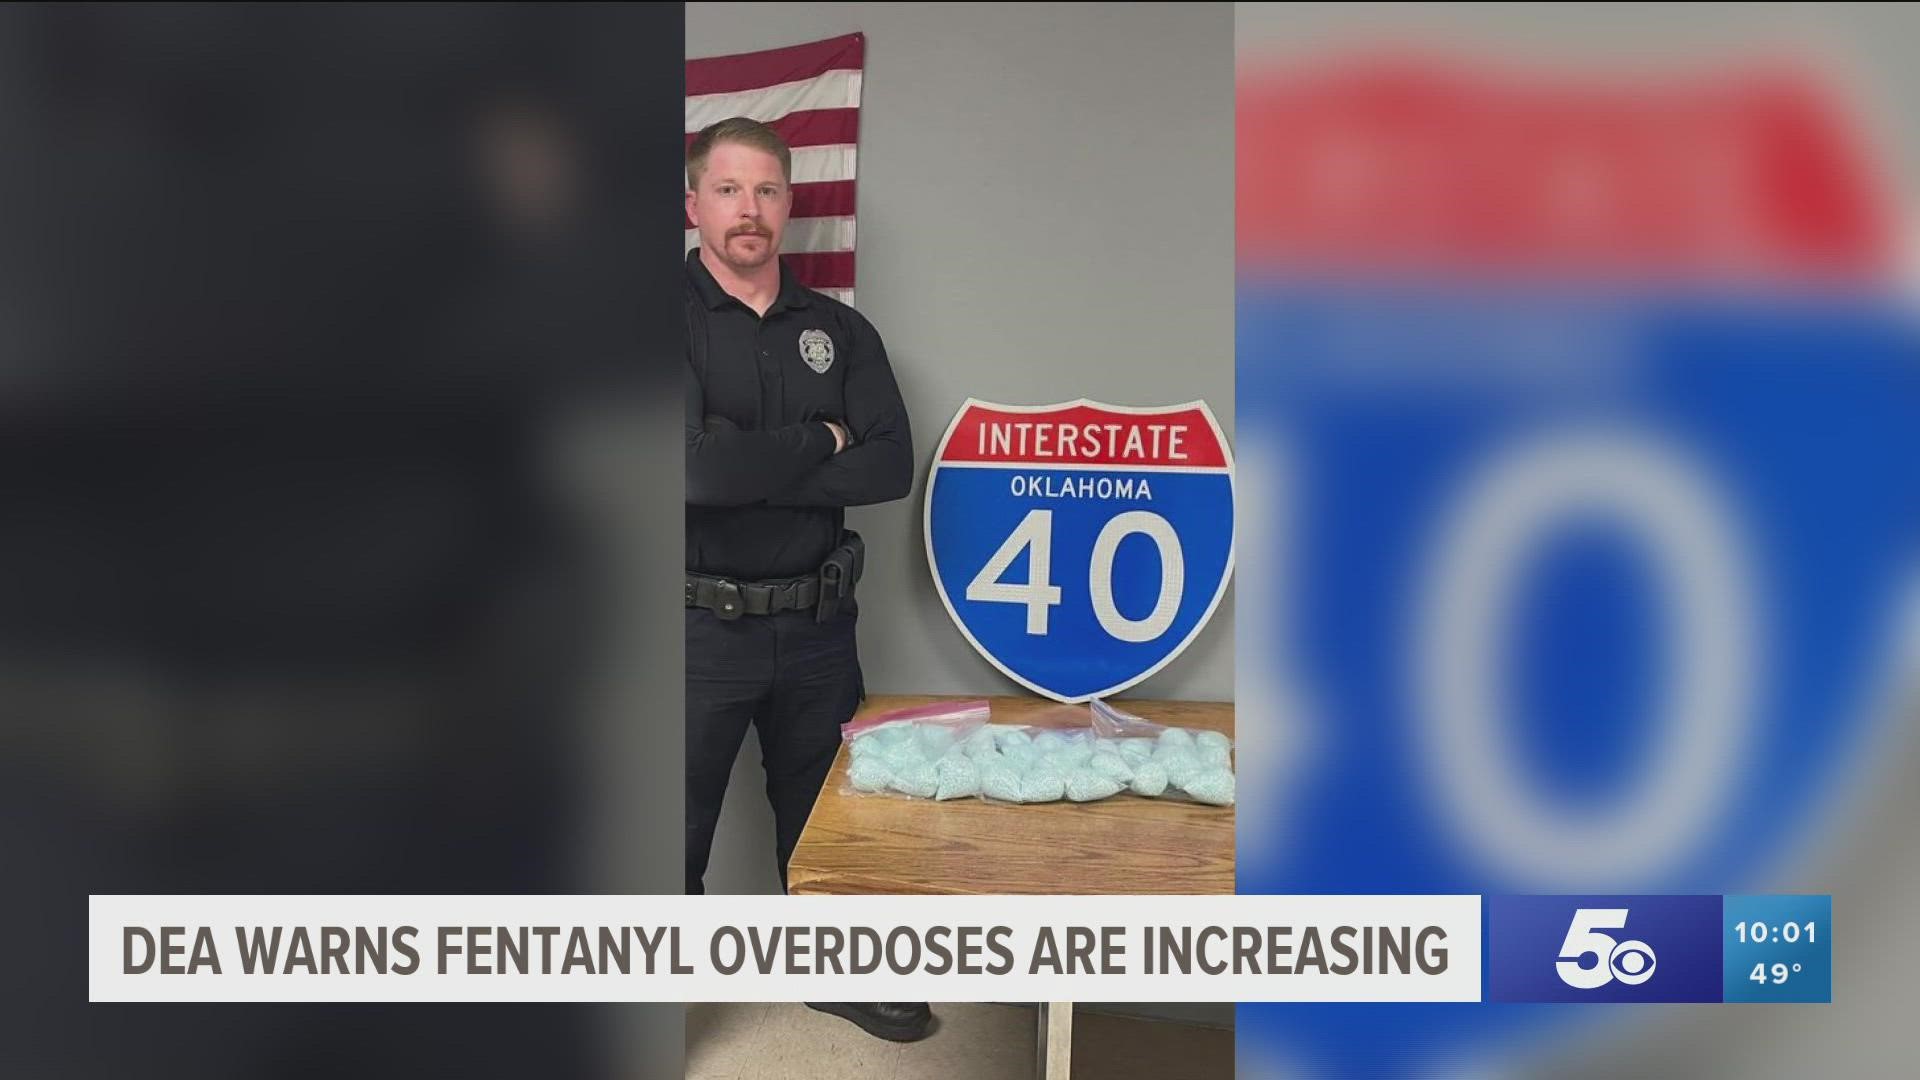 The DEA and local law enforcement agencies are combating the increasing number of opioid overdose deaths and taking down the drug trafficking rings responsible.